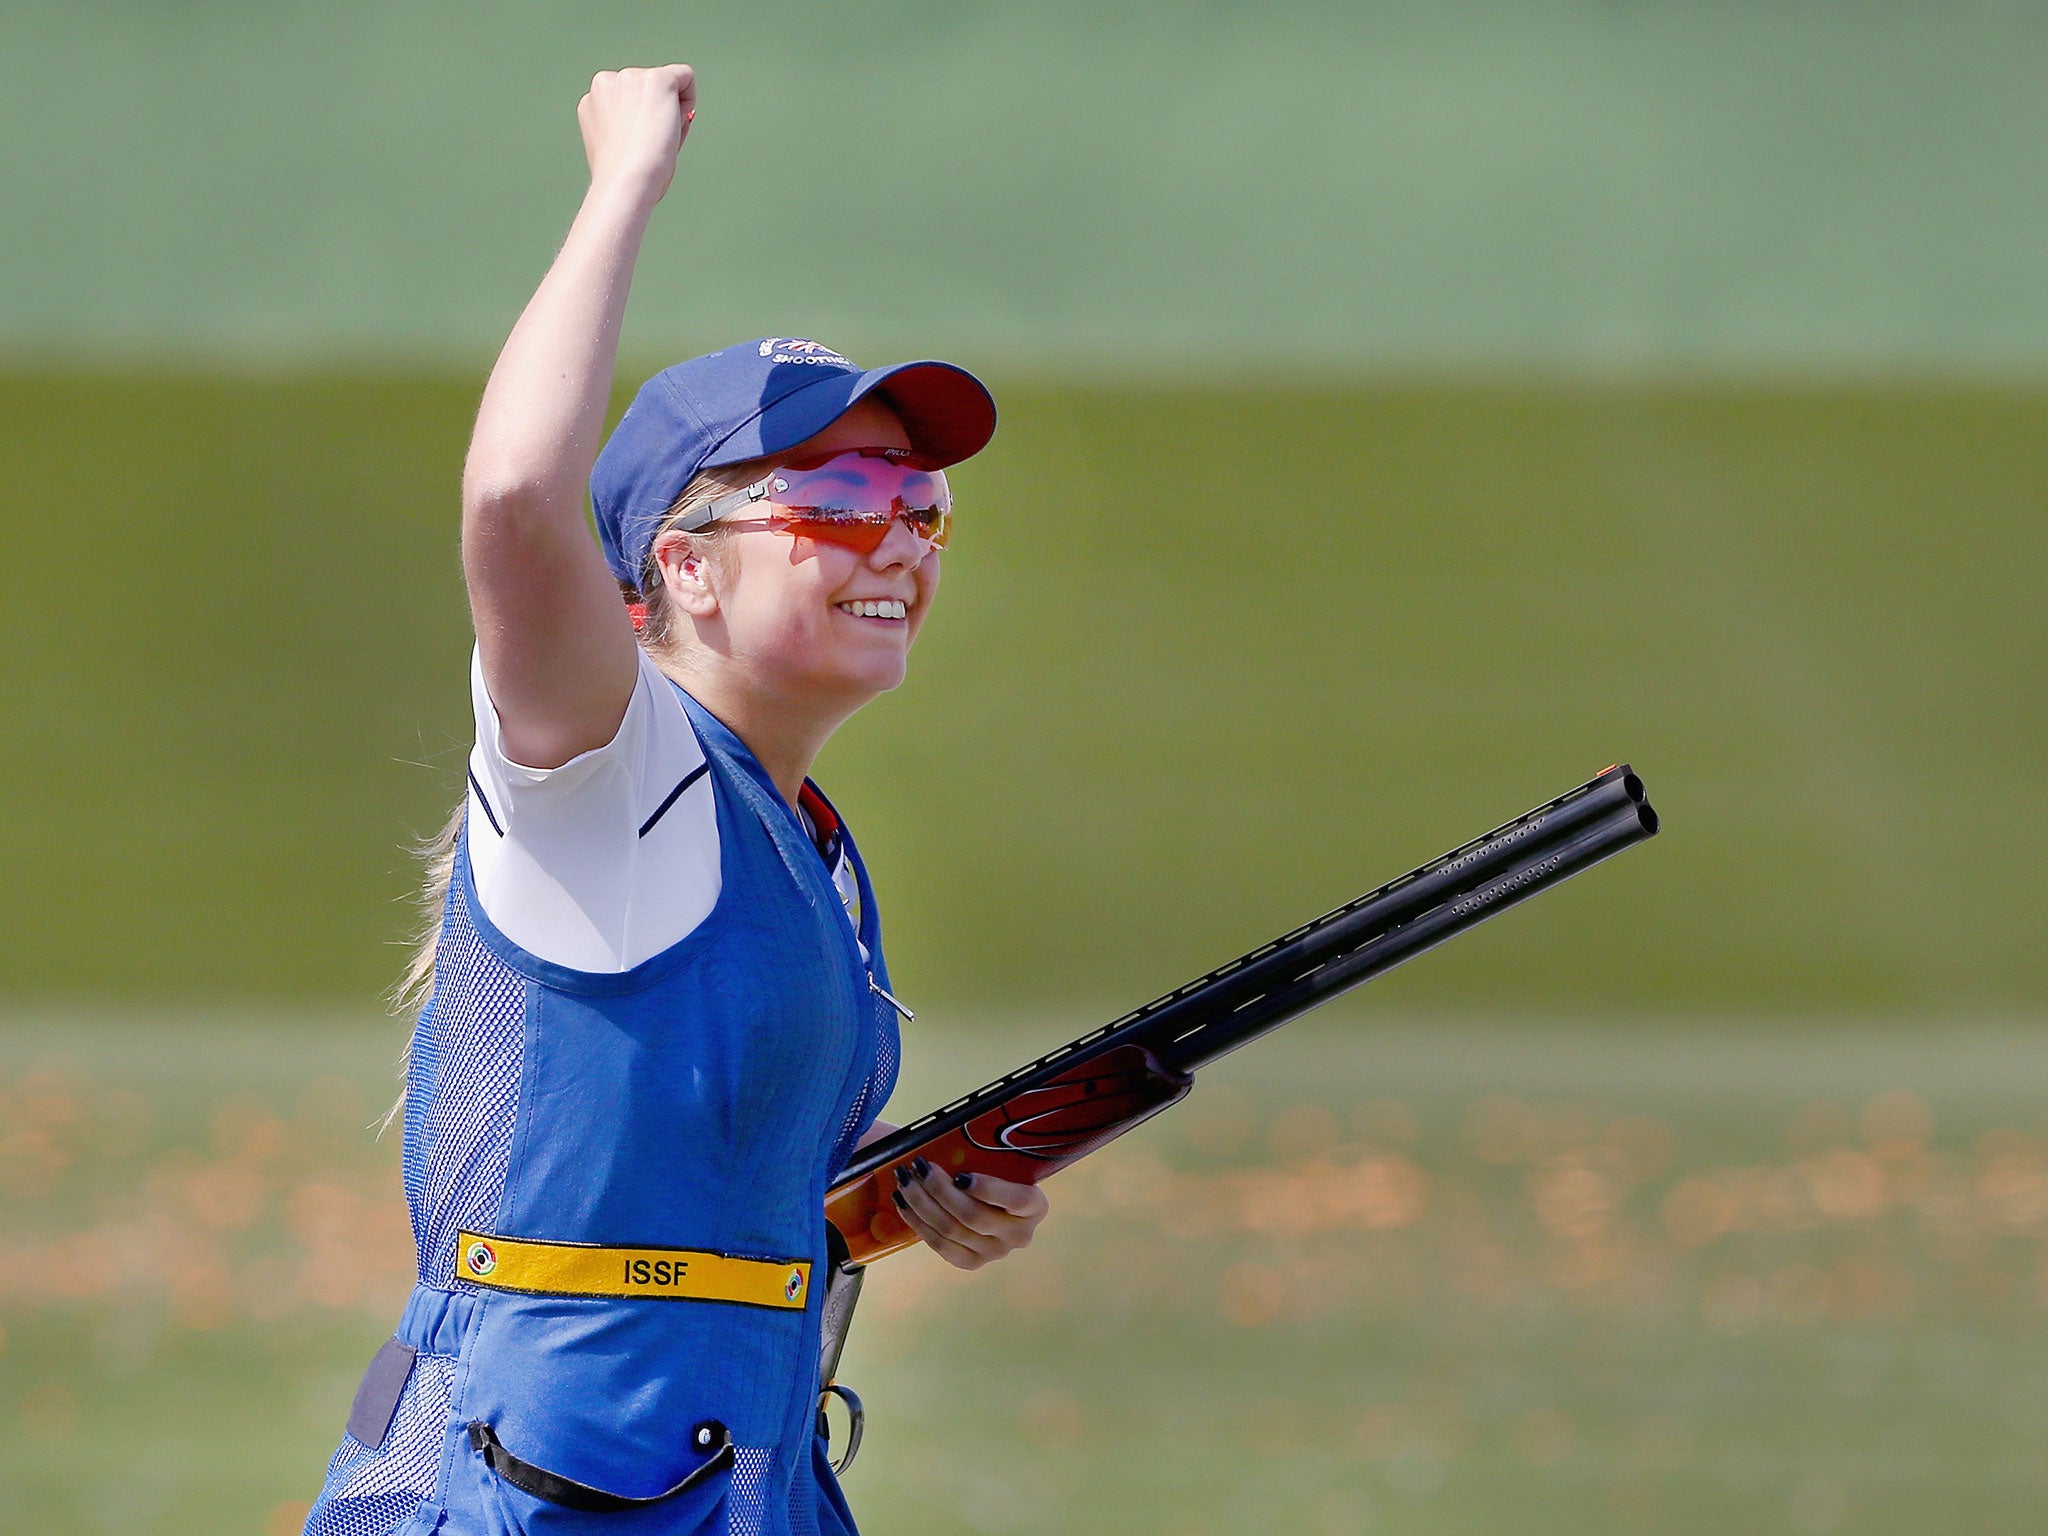 Amber Hill wins shooting gold for Great Britain